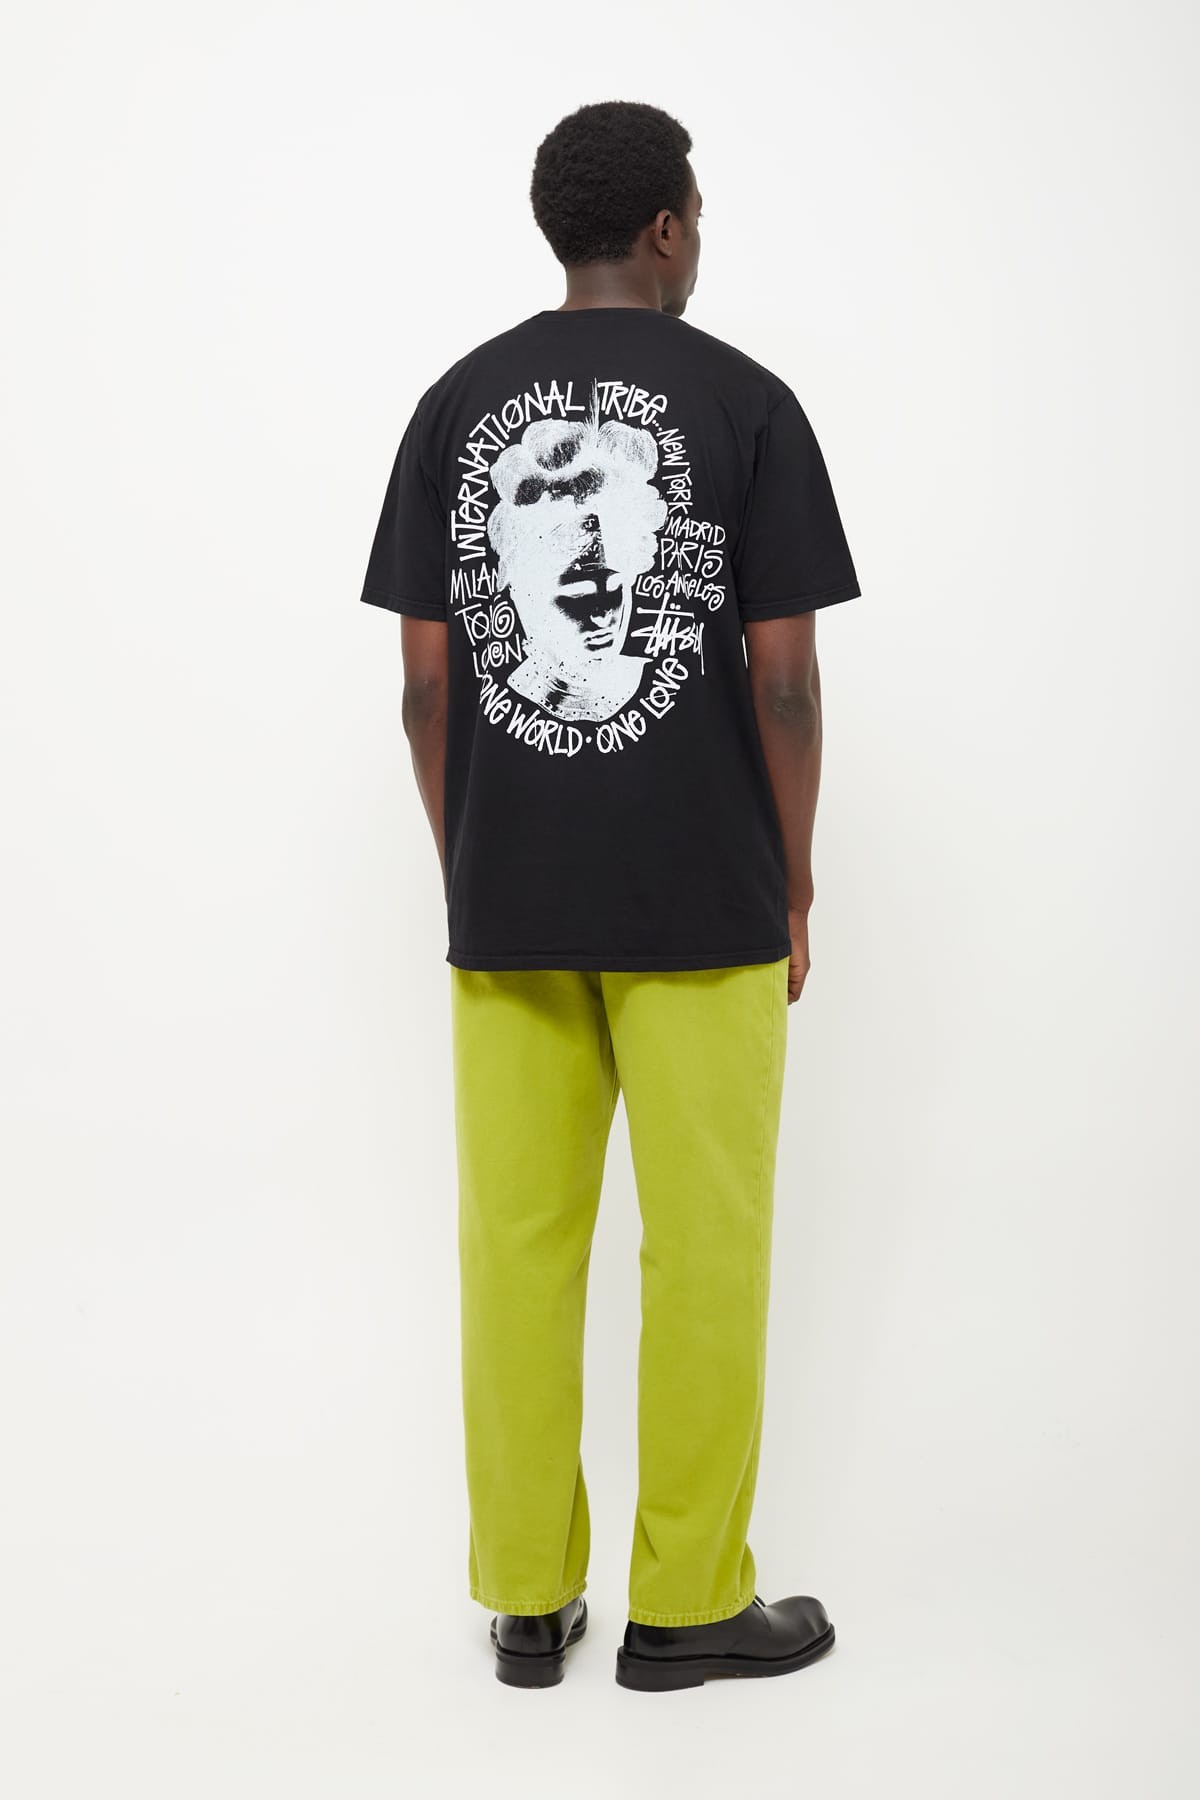 STUSSY BLACK CAMELOT PIG DYED T-SHIRT IAMNUE